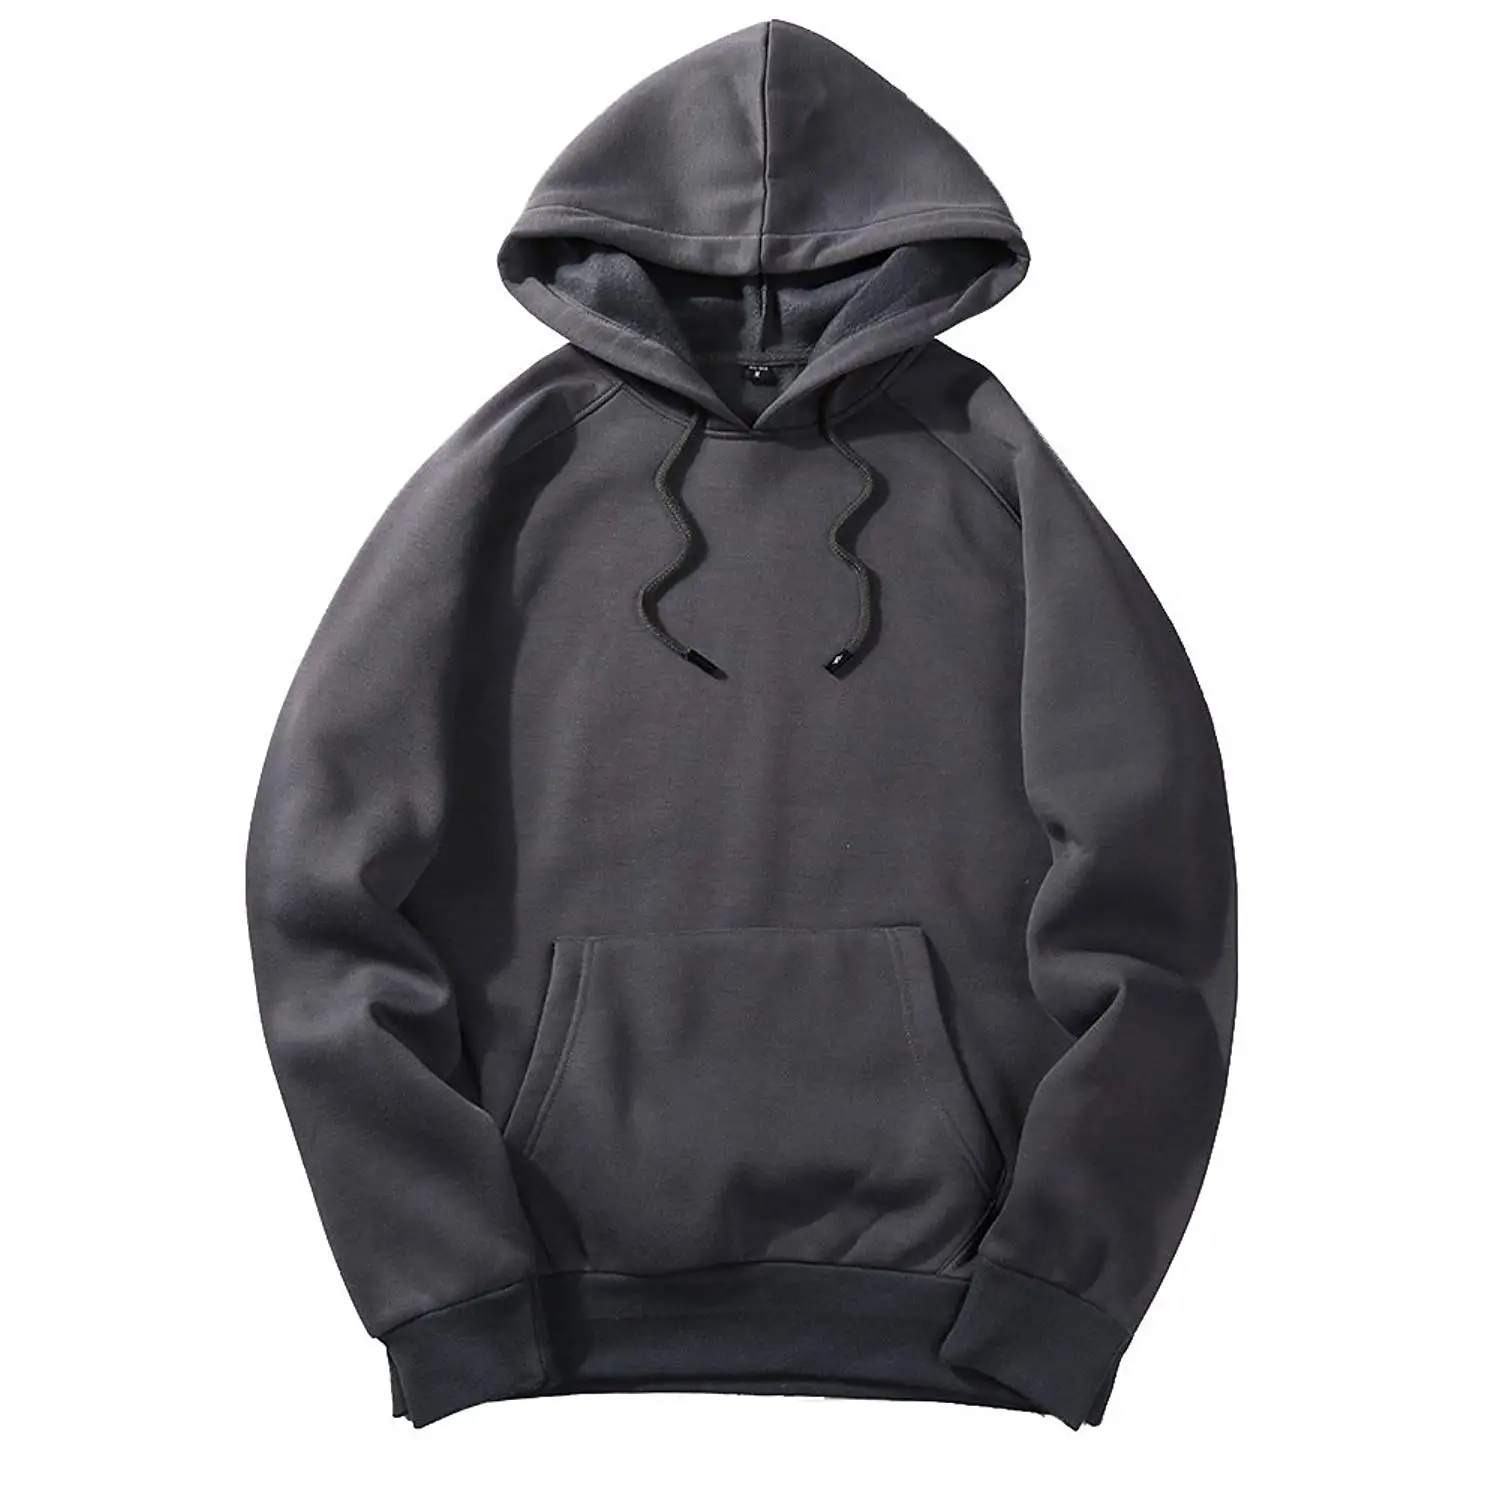 Cheap Solid Hoodie, find Solid Hoodie deals on line at Alibaba.com